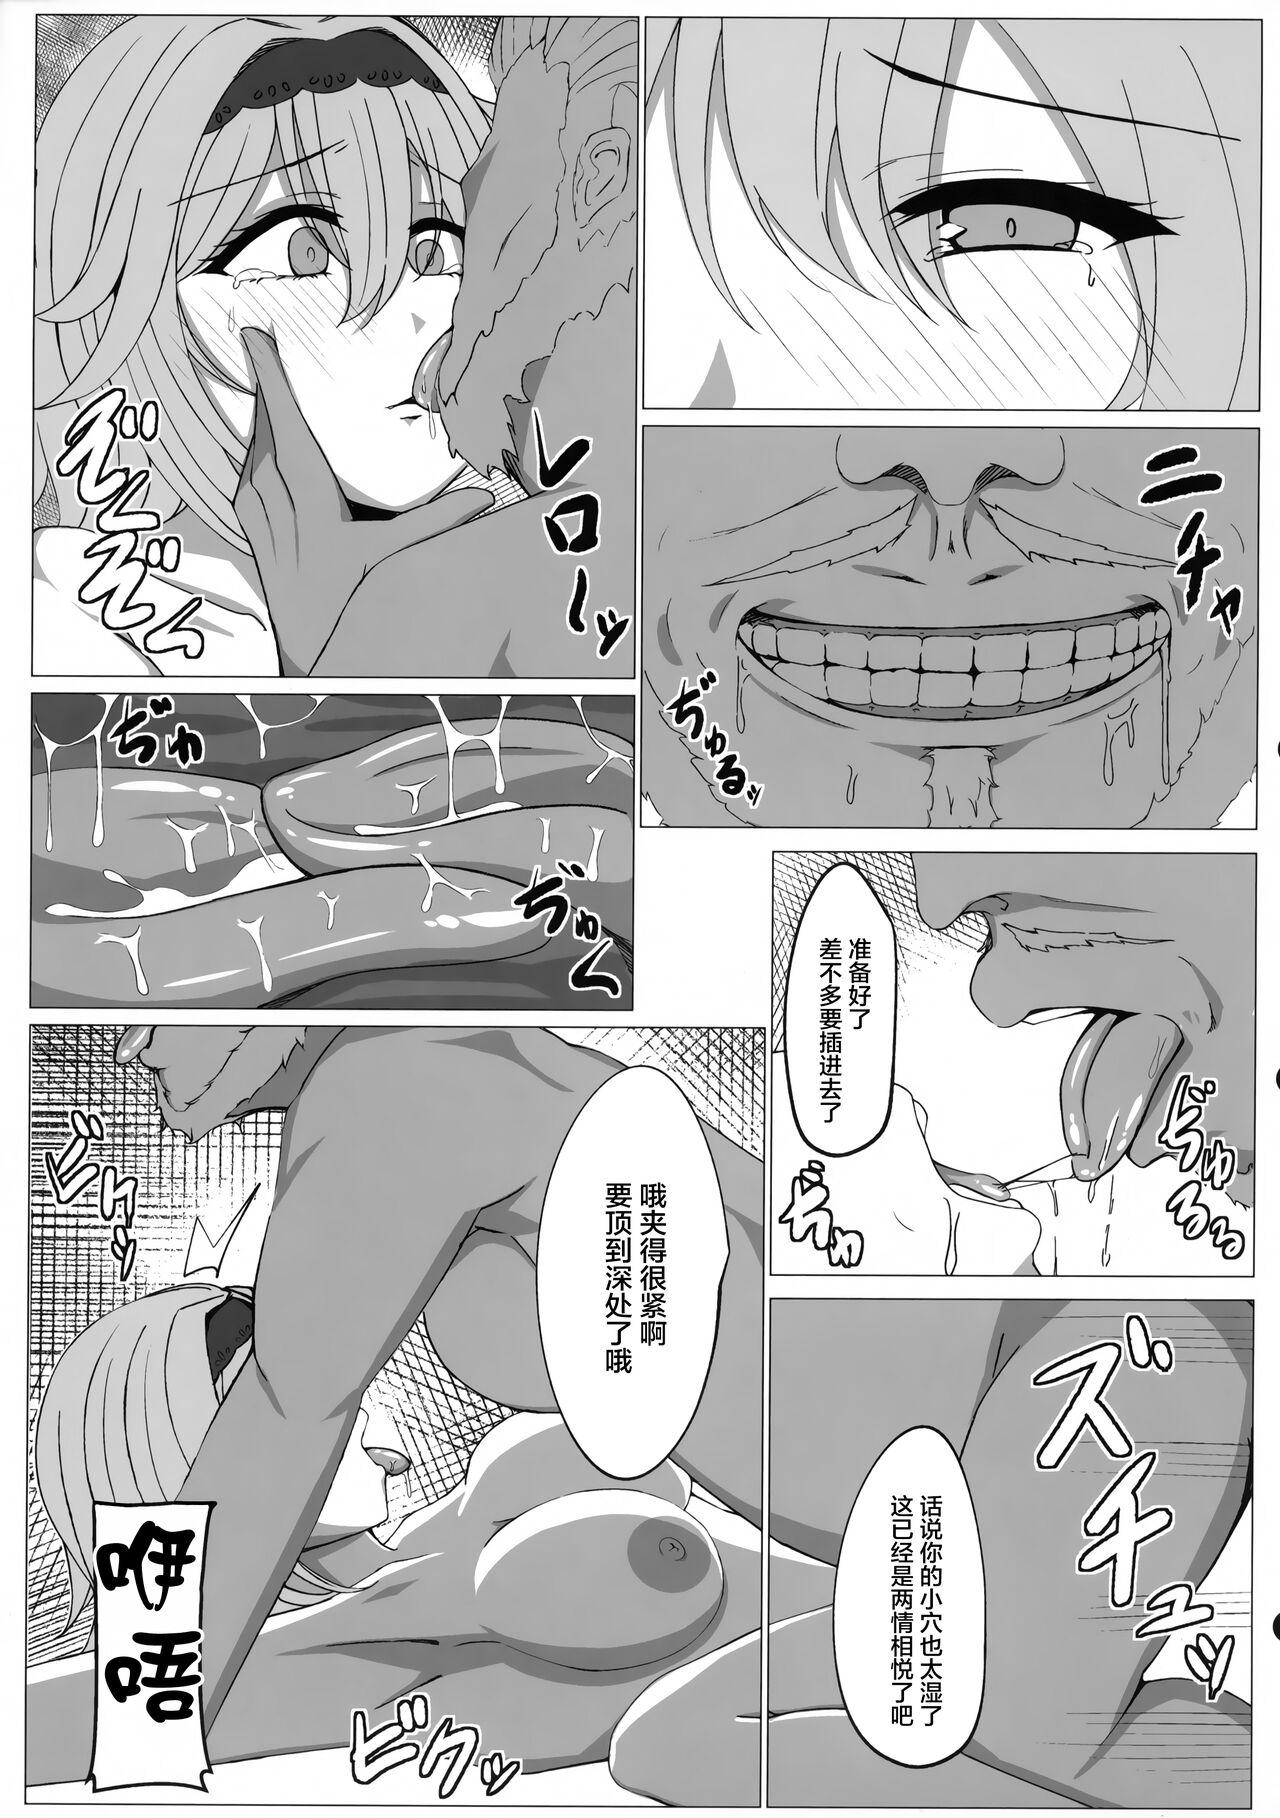 Best Blowjob Ever COLLAPSE DAY - Genshin impact Athletic - Page 10